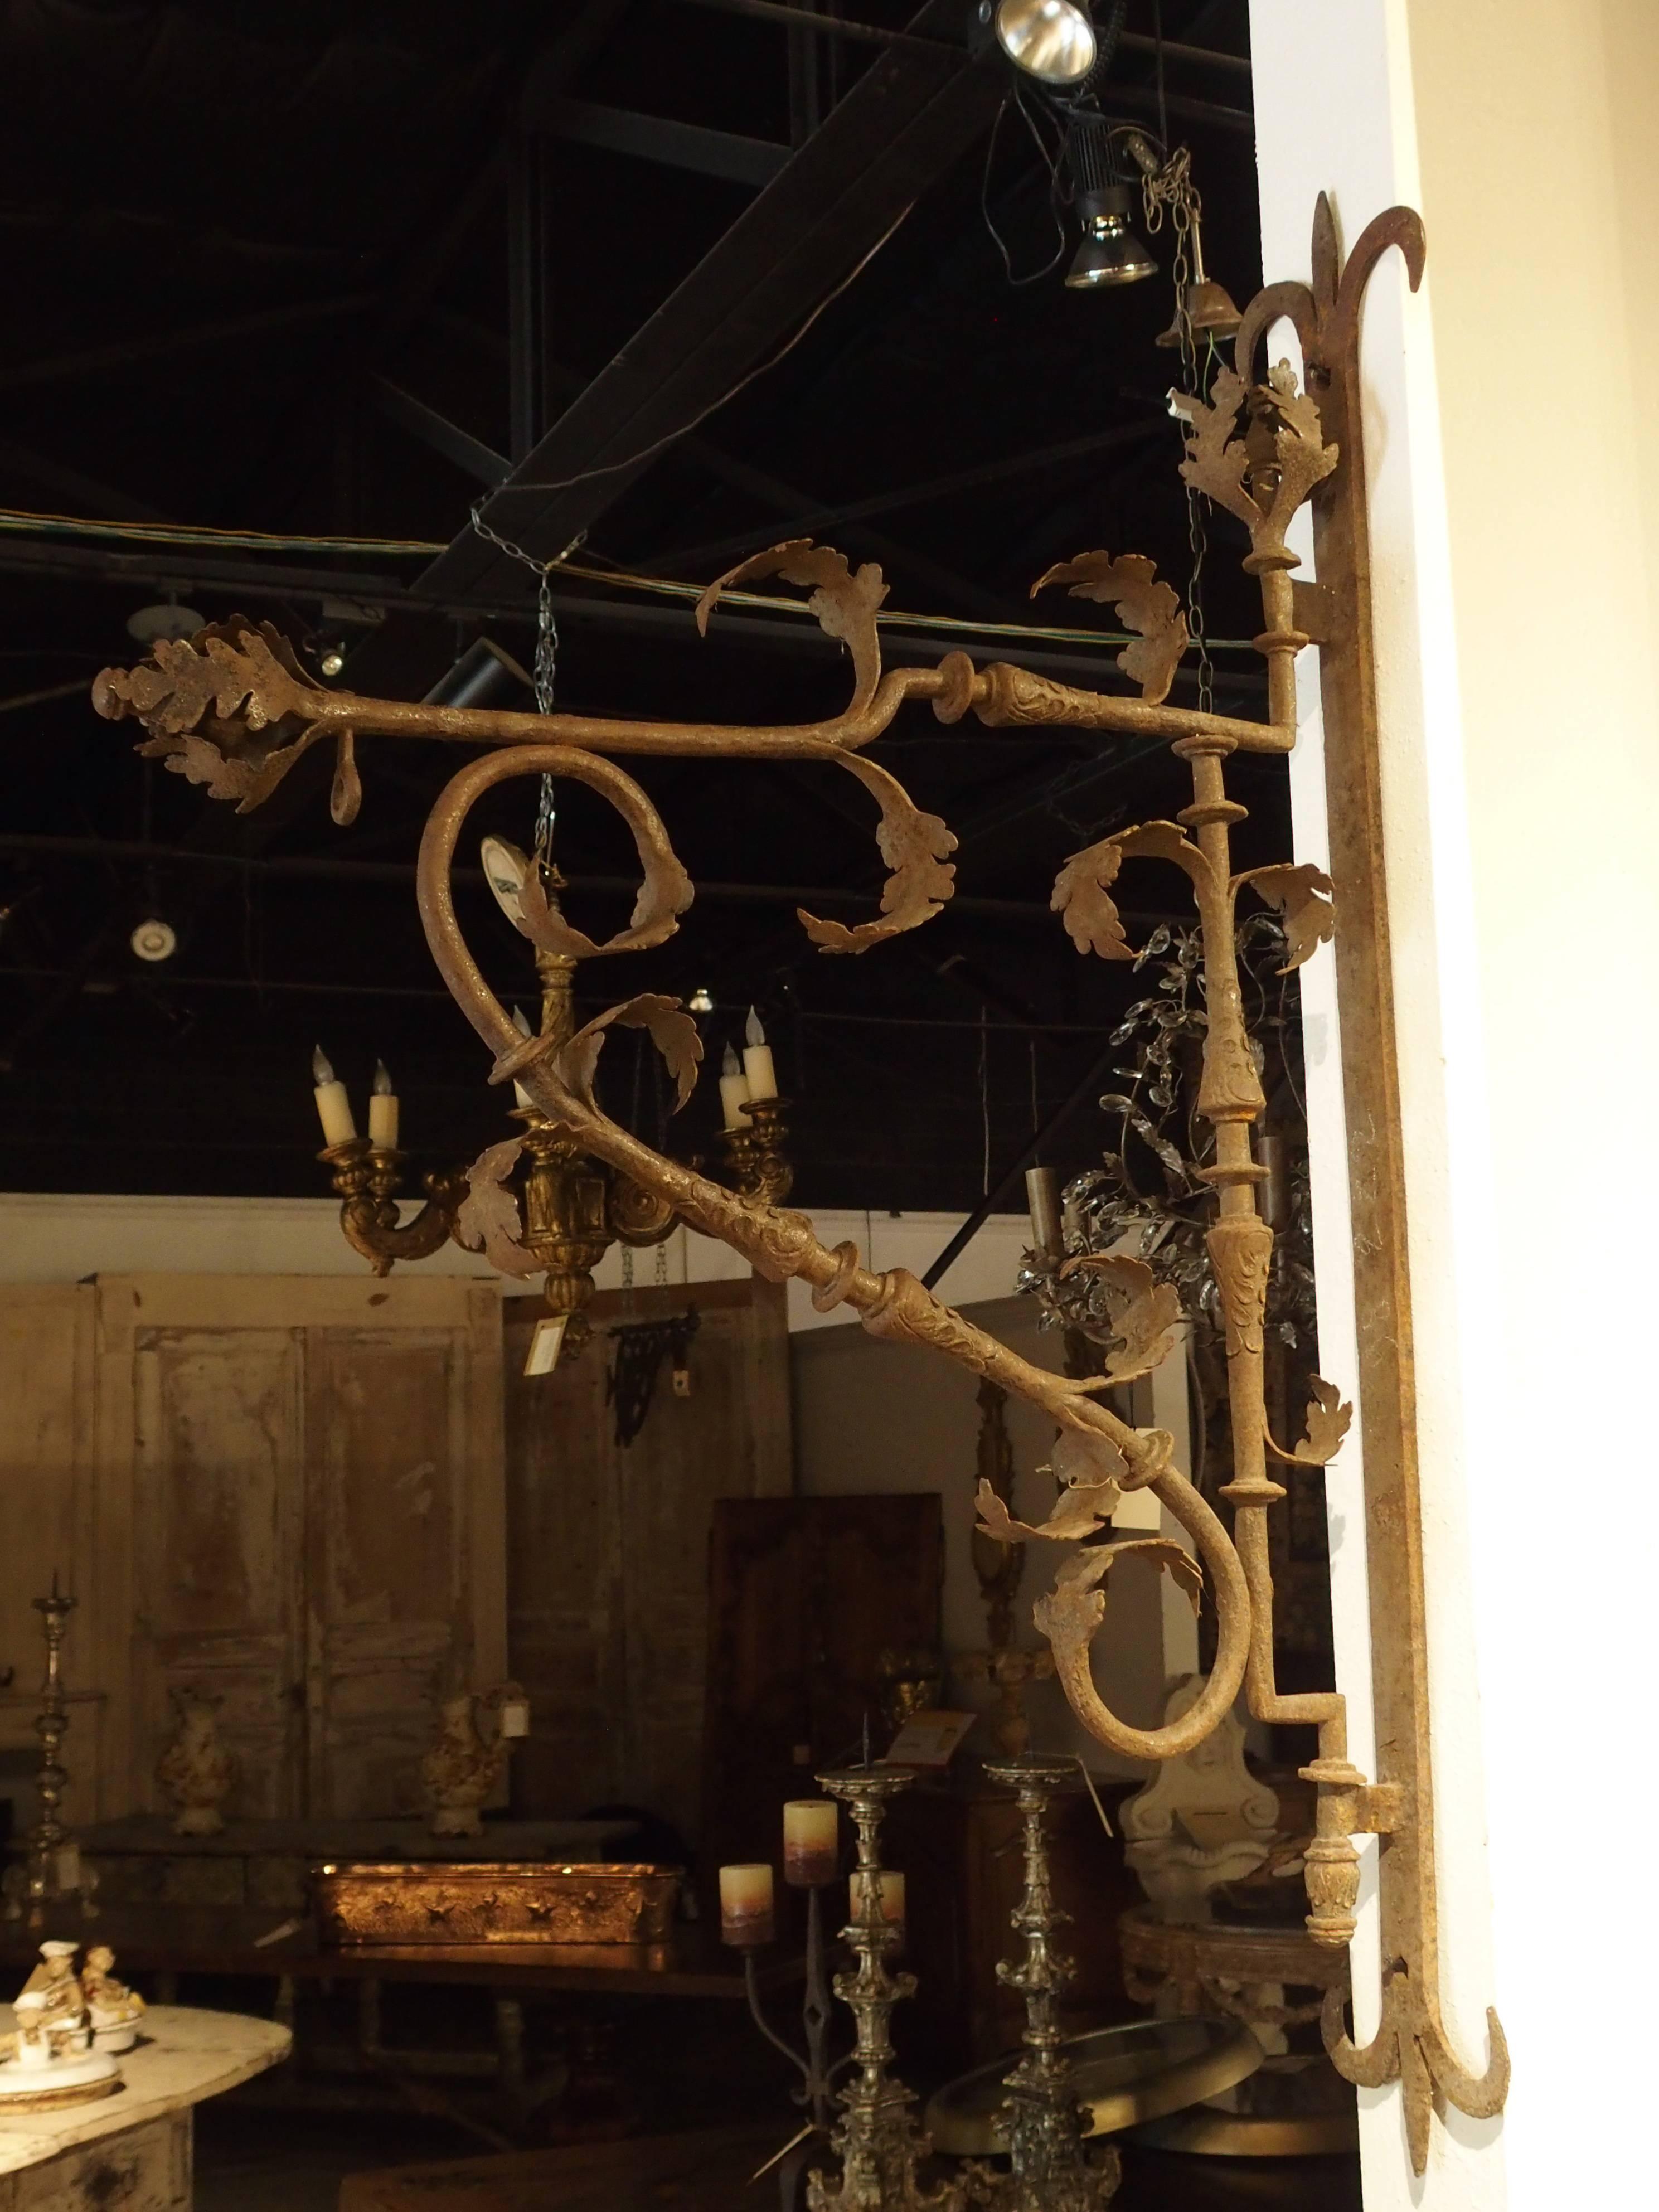 This is a magnificent antique French iron store sign holder or lantern holder from the 1700s. There is a circular iron piece at the end of the top rod from which a sign or lantern would have hung. The main iron support is a vertical, wall mounted